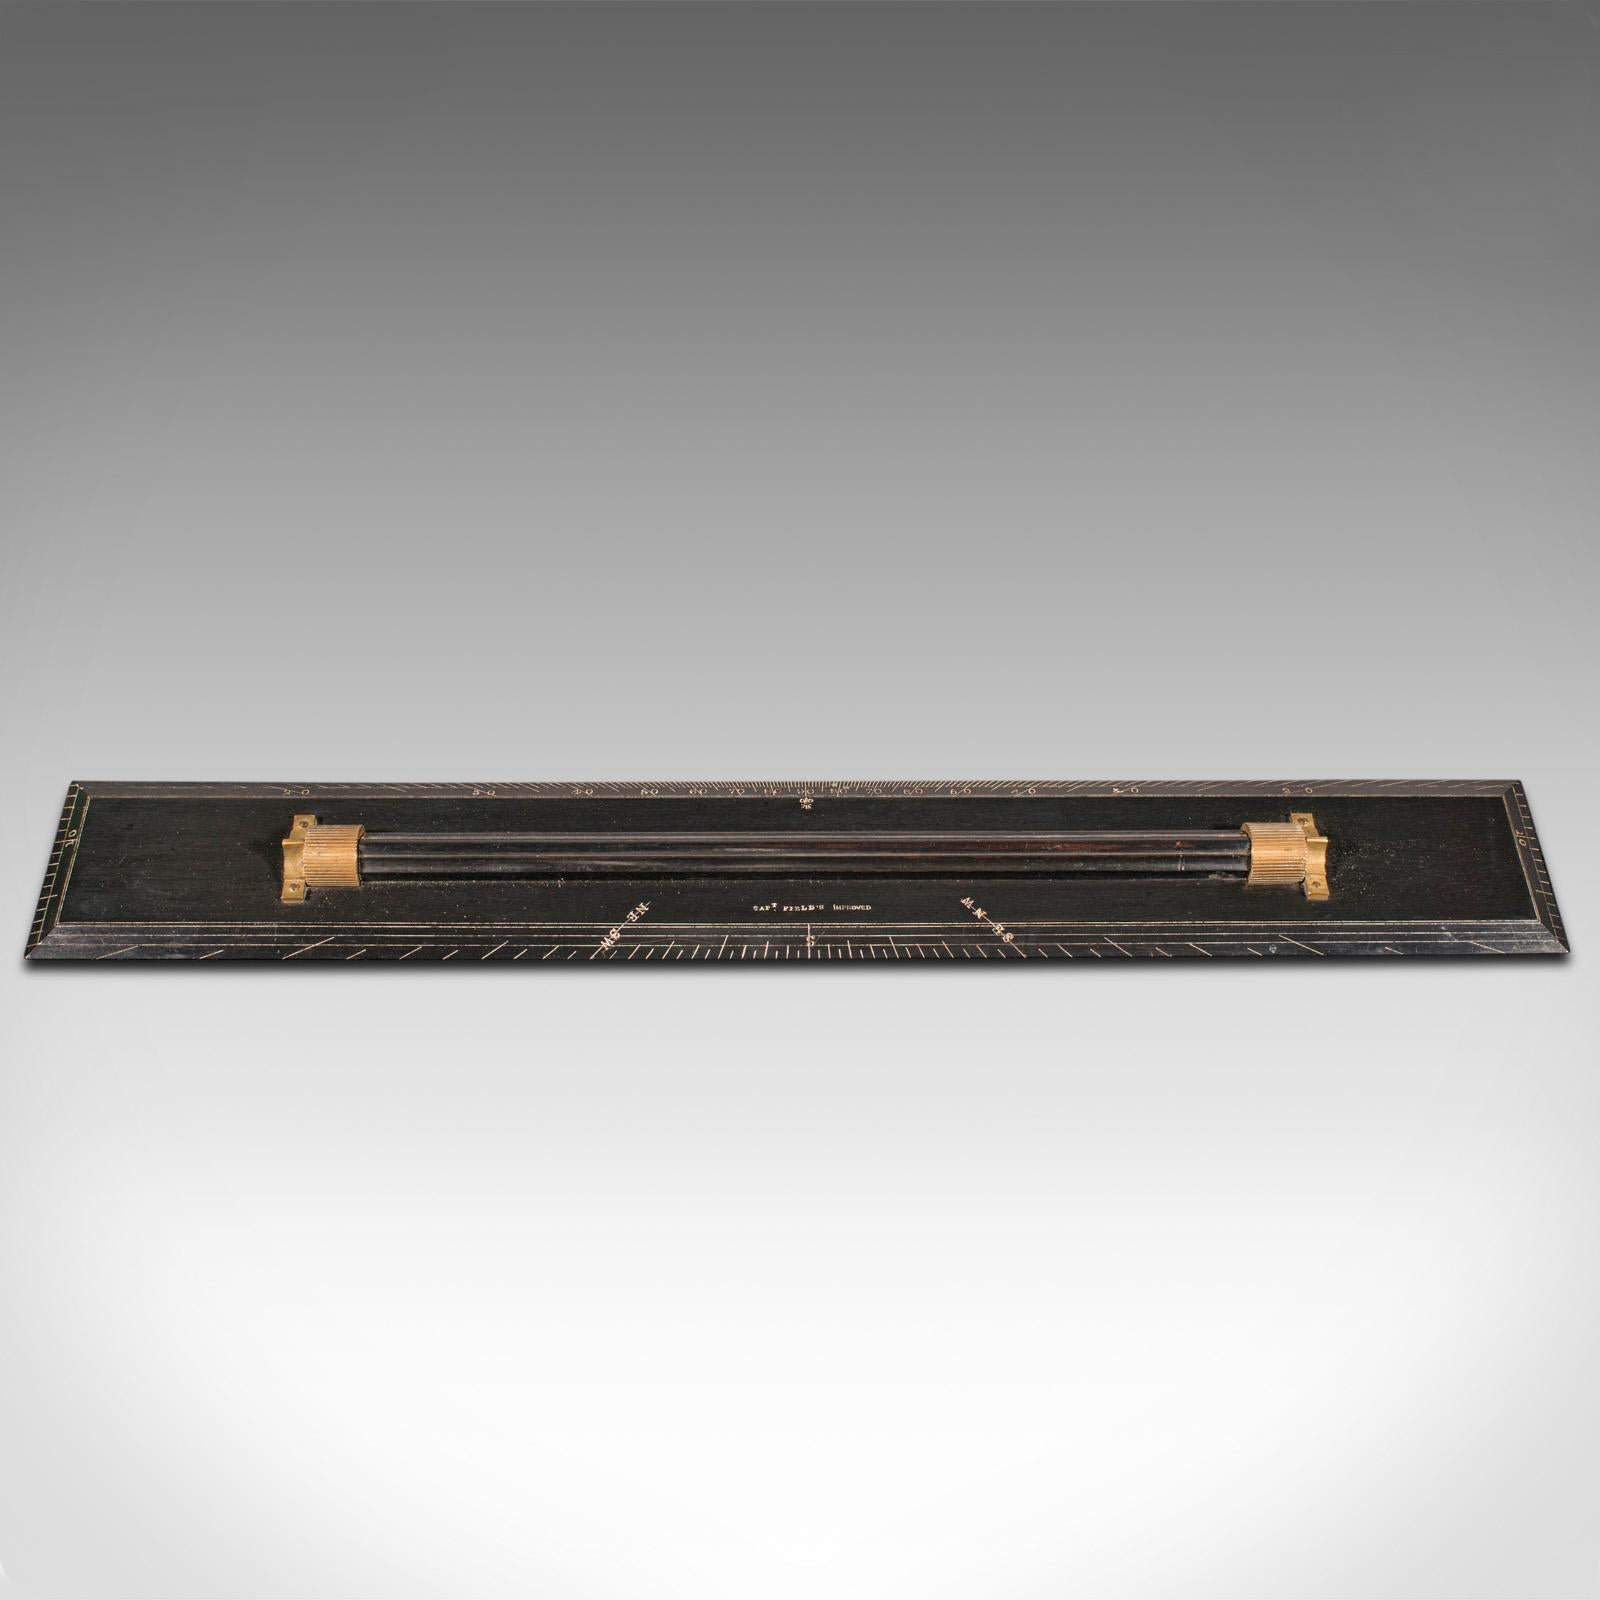 This is an antique nautical rolling ruler. An English, ebony maritime or draughtsman's instrument of the Captain Field's Improved type, dating to the late Victorian period, circa 1900.

A treat for cartographers or draughtsman with this appealing